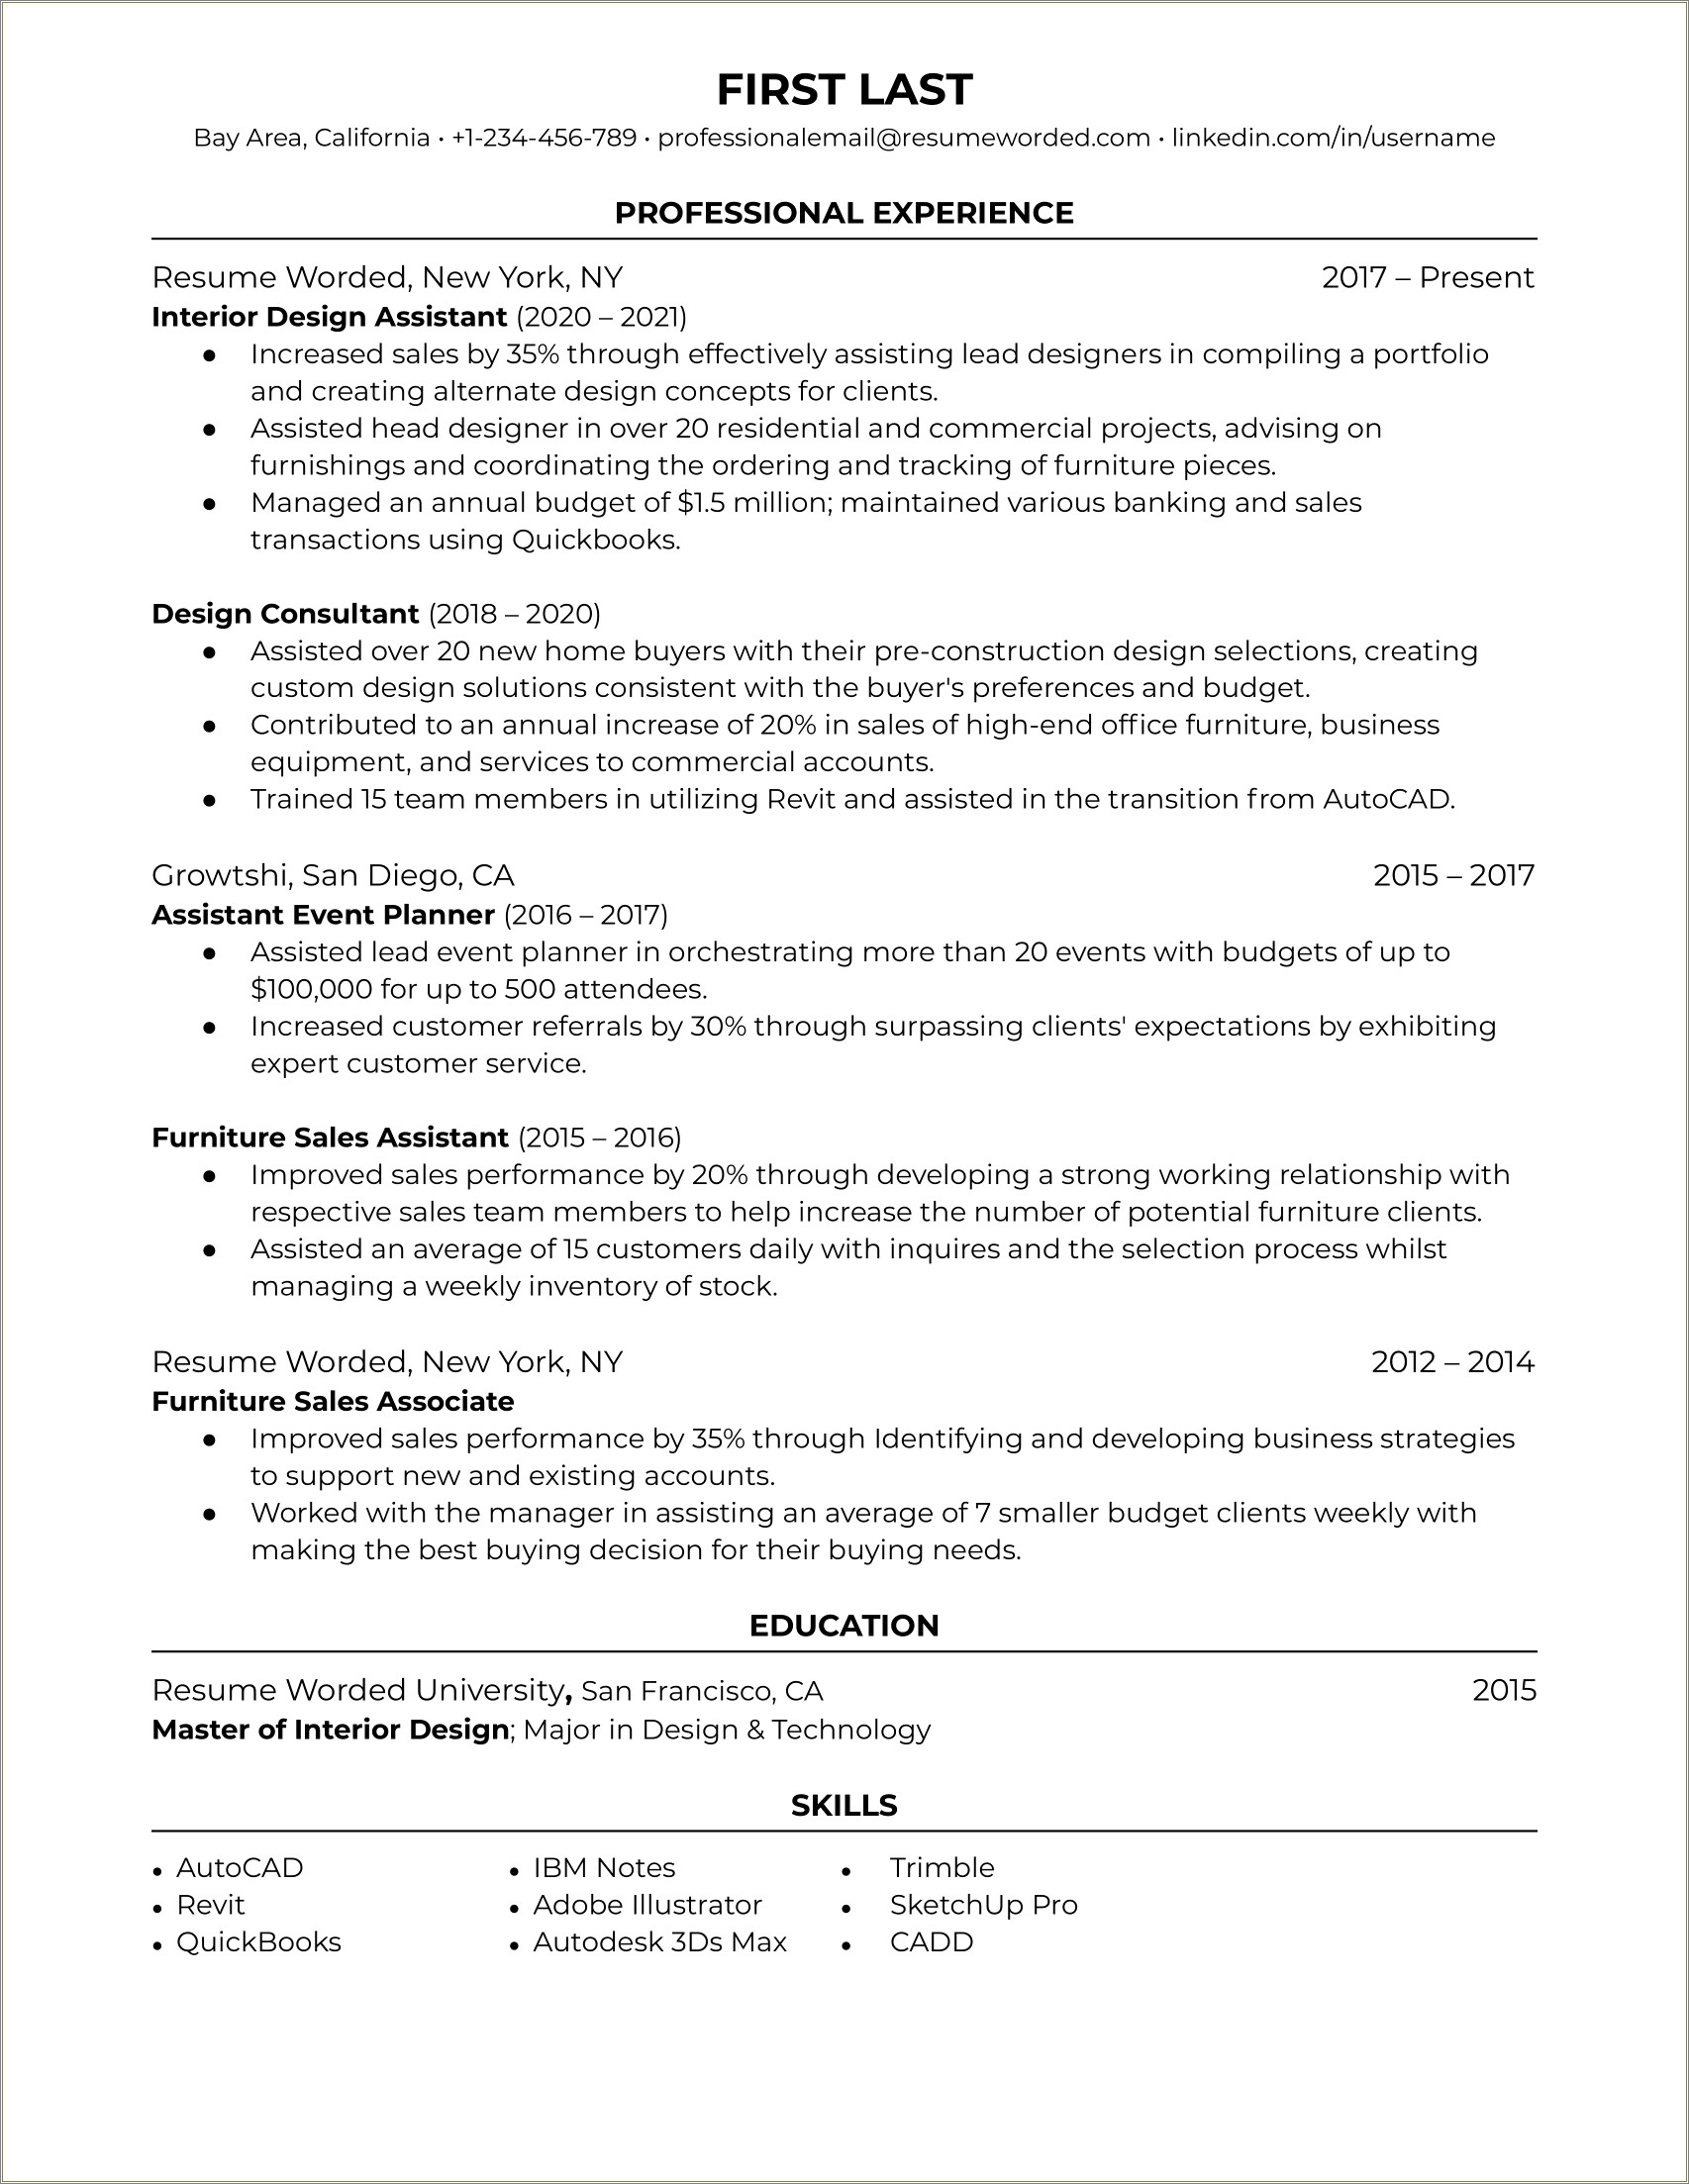 Ibm Consultant Resume With Outside Consulting Experience